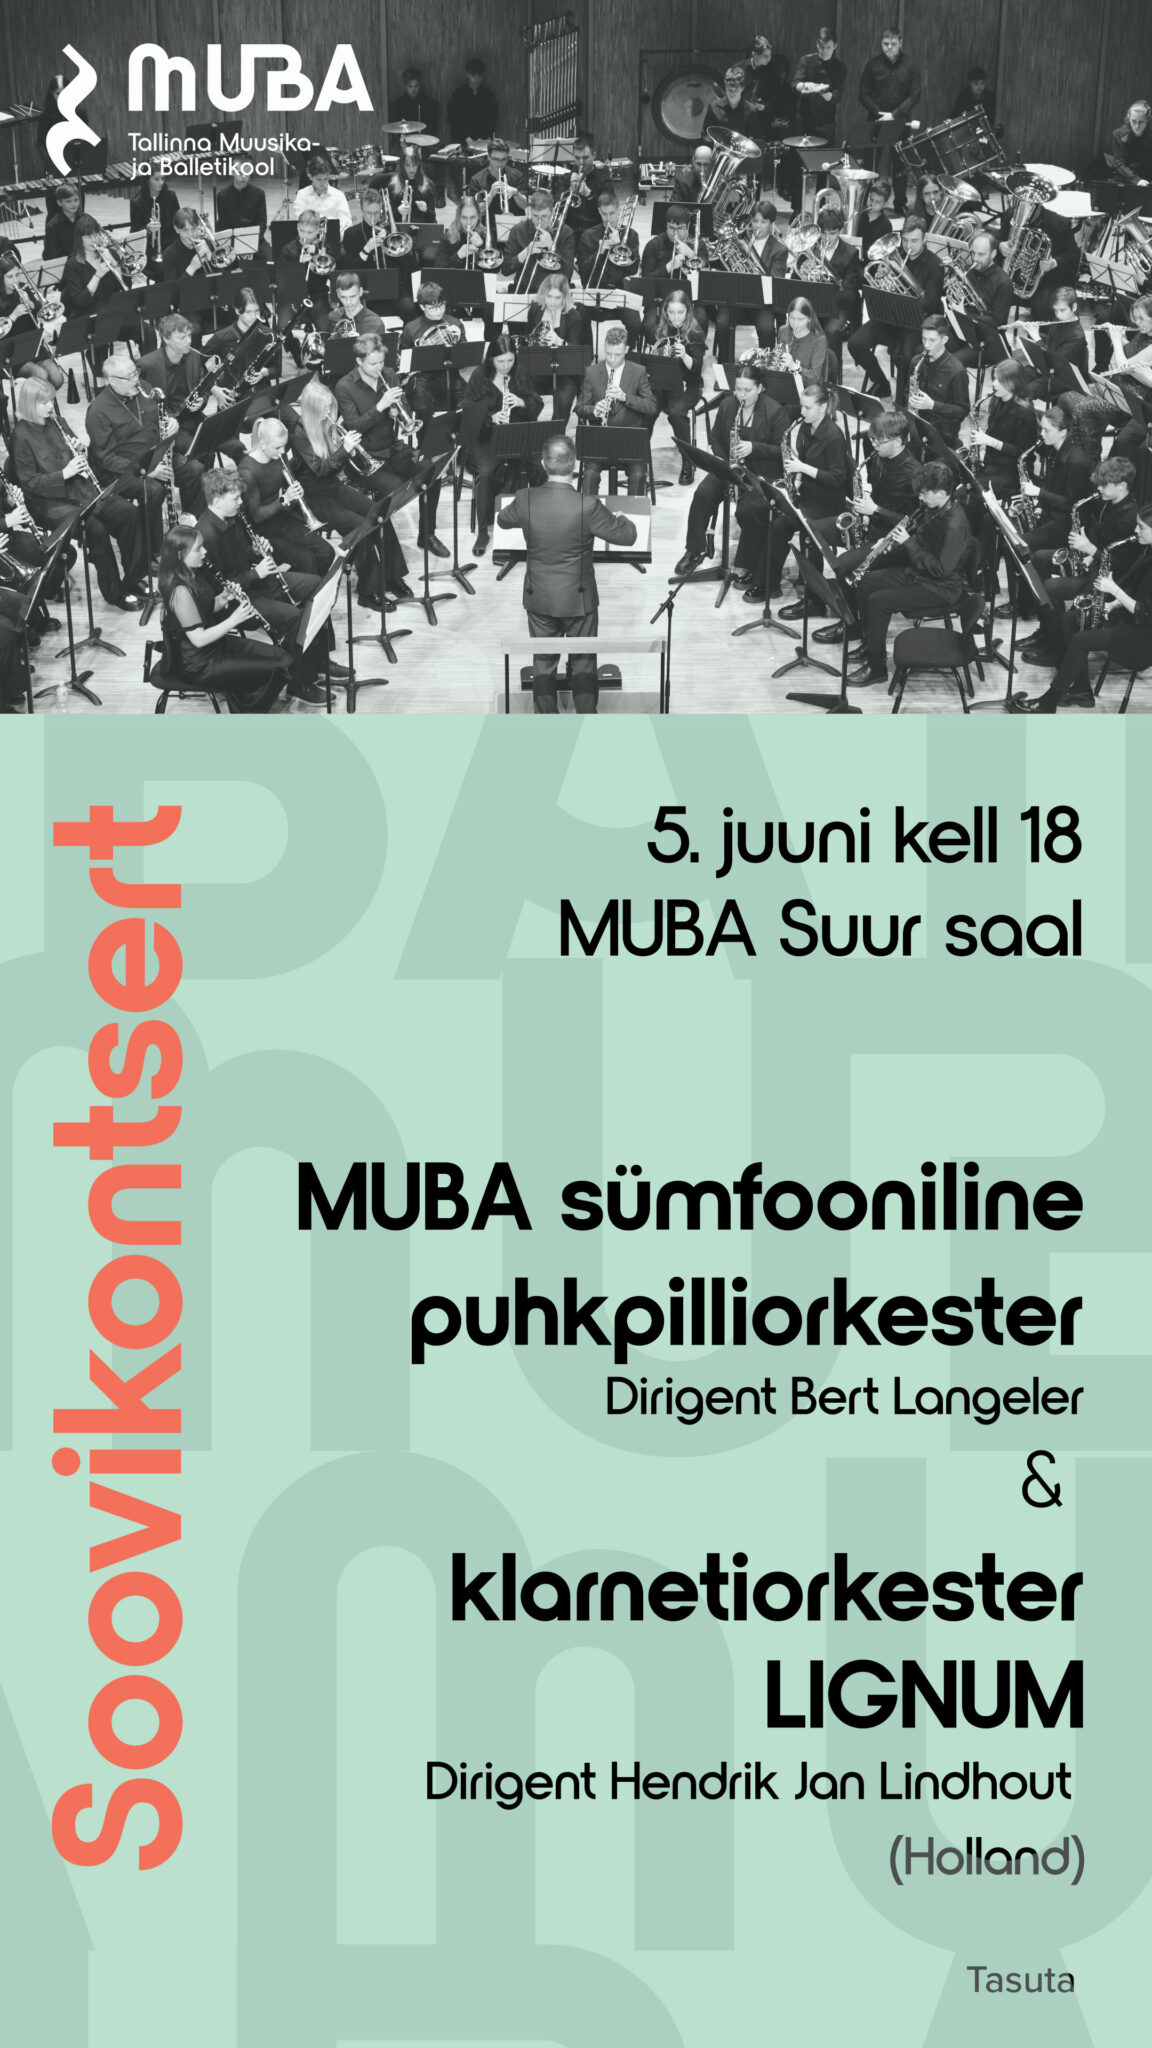 Clarinet Orchestra LIGNUM (The Netherlands) and MUBA Symphonic Wind Orchestra concert